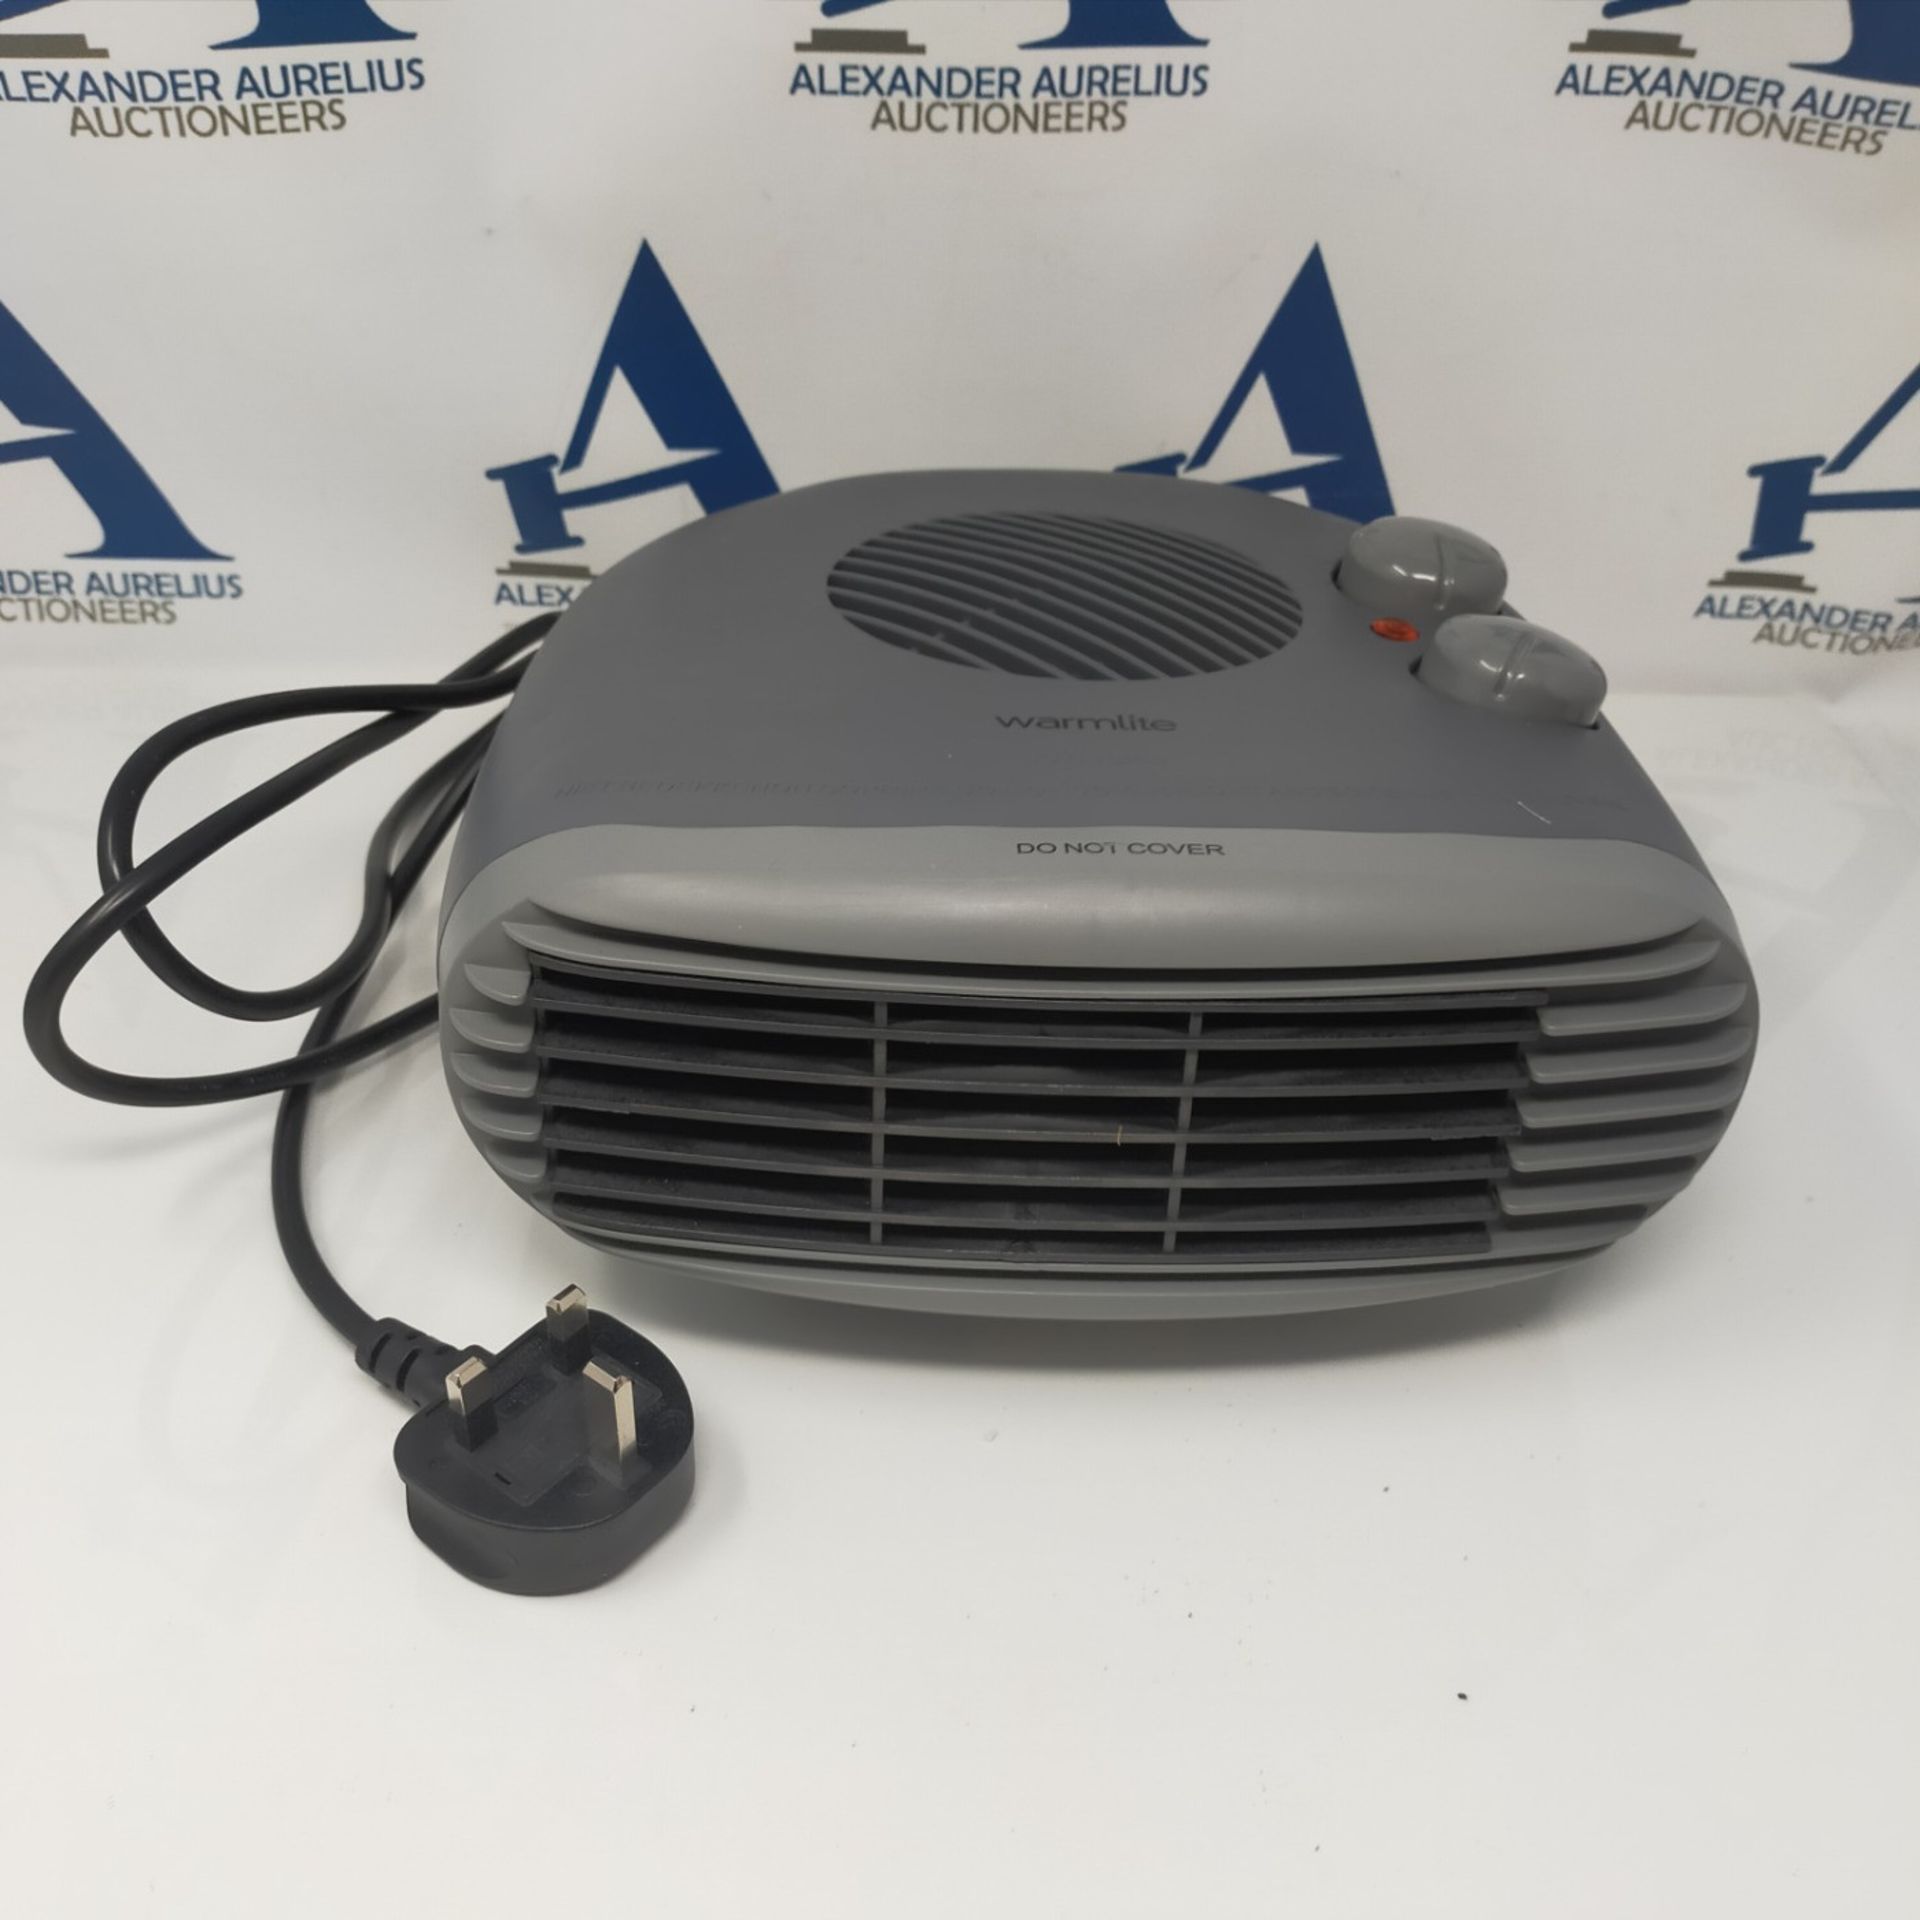 Warmlite WL44004DT 2000W Portable Flat Fan Heater with 2 Heat Settings and Overheat Pr - Image 3 of 3